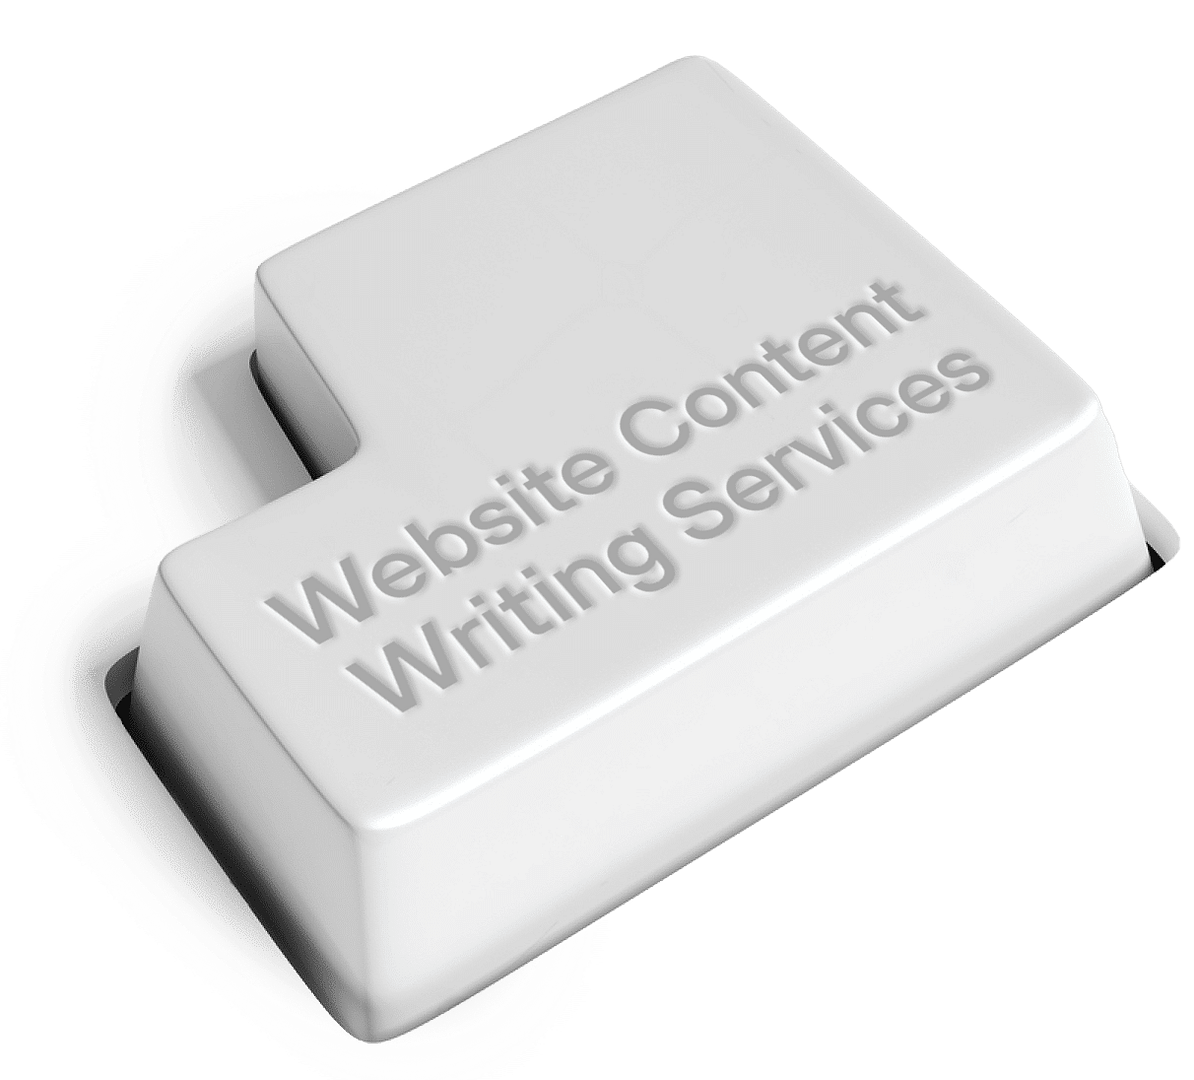 website content writing services written on a keyboard key